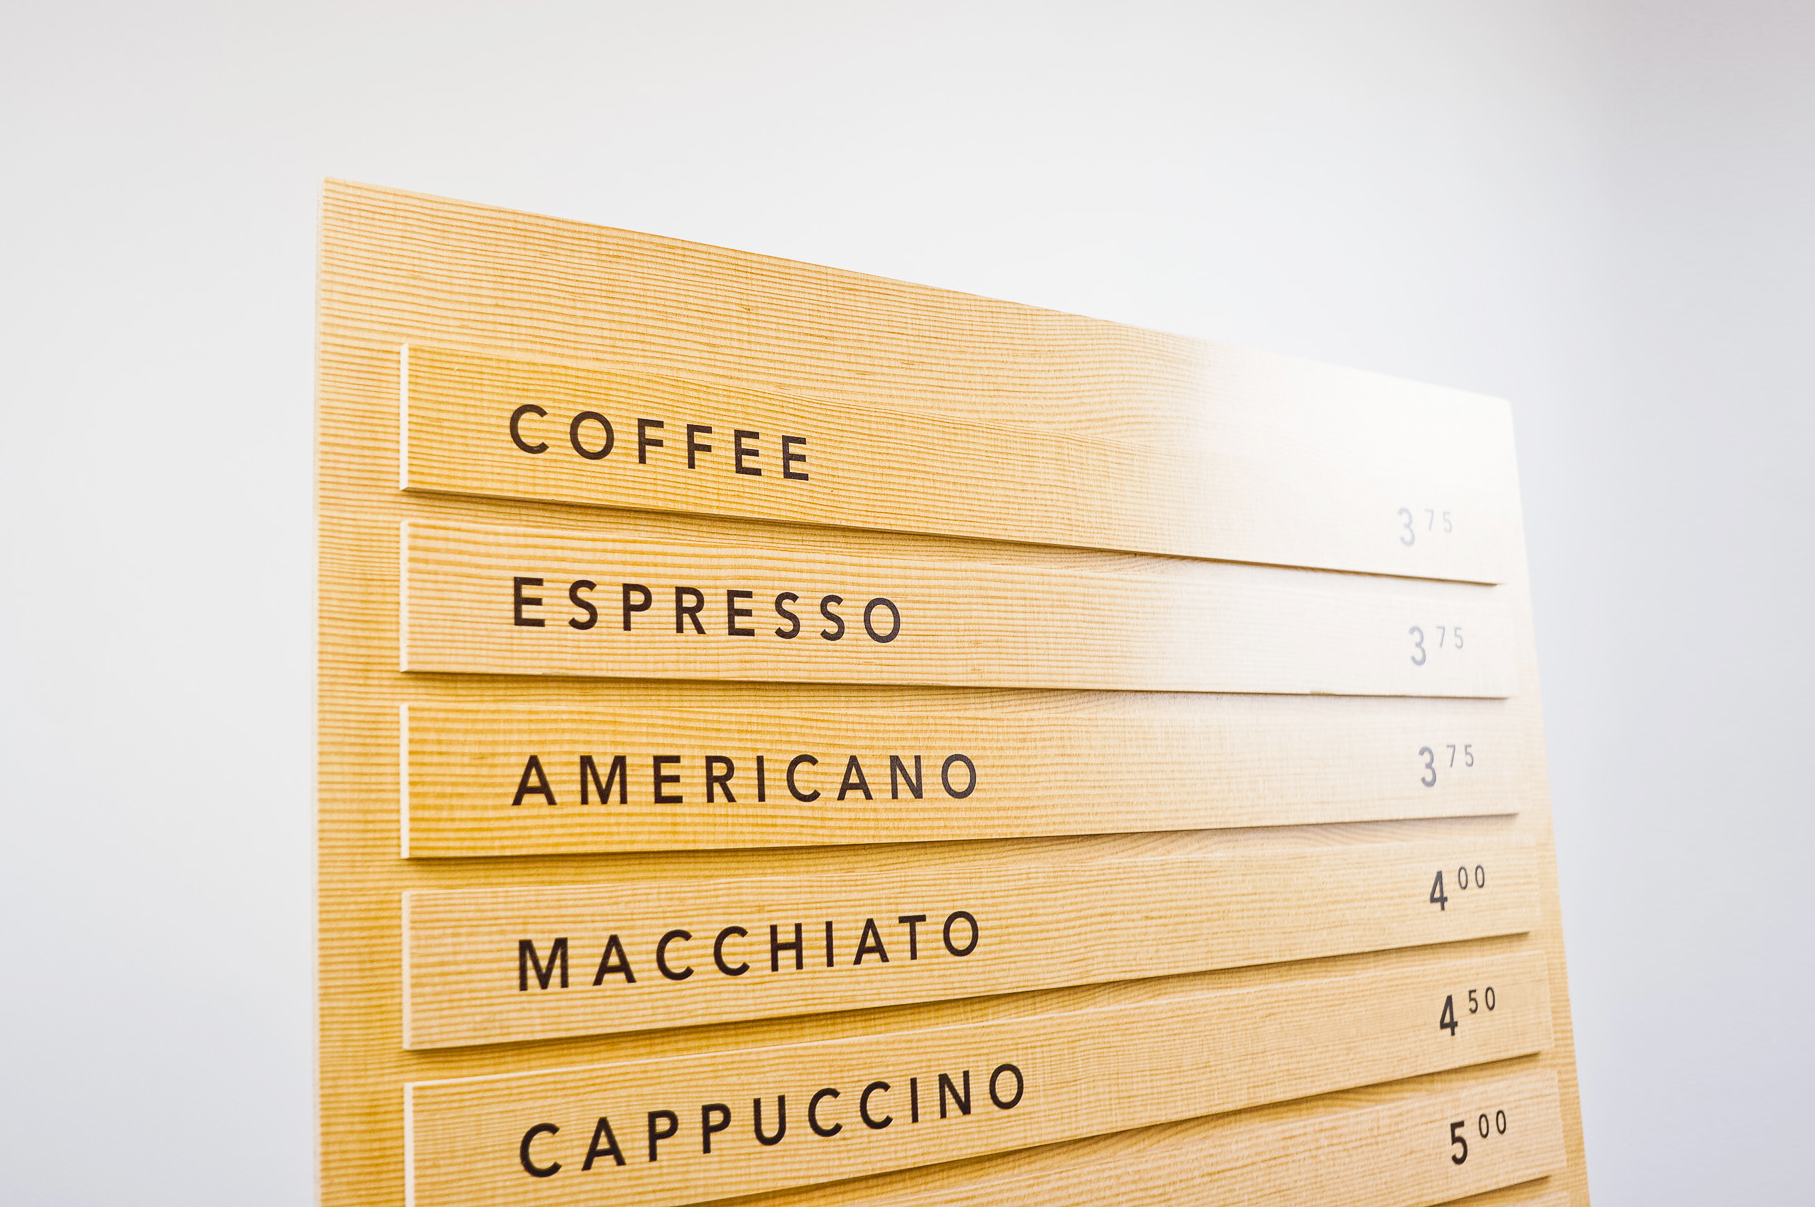 Wood menu with changeable items for Four Barrel, an independent coffee company based in San Francisco.